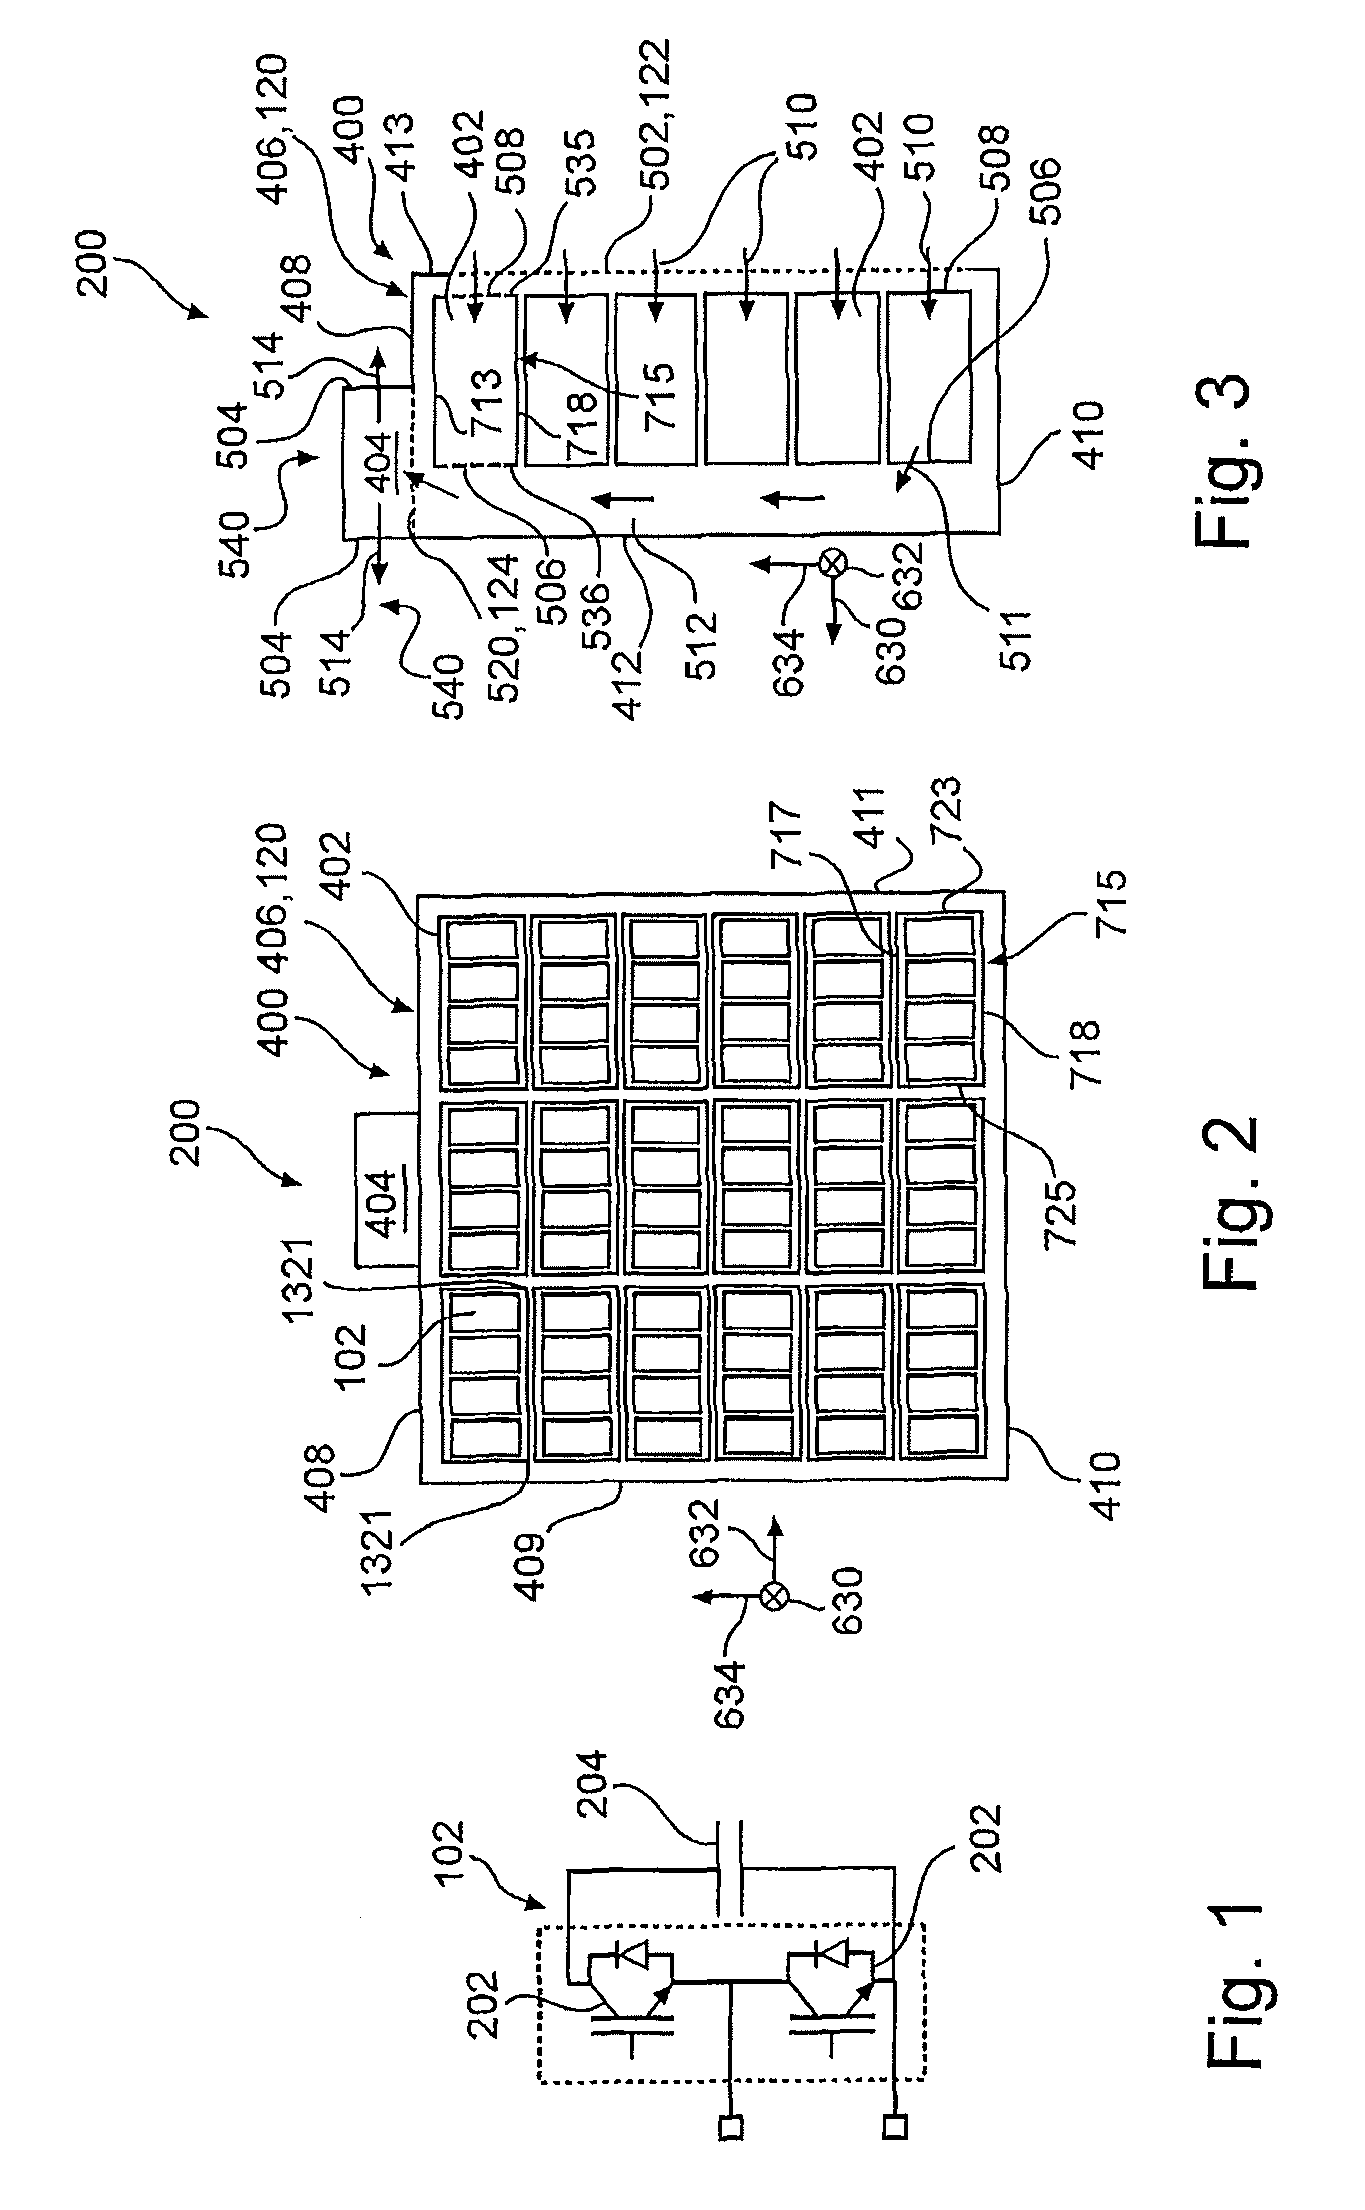 Thermosiphon cooler arrangement in modules with electric and/or electronic components